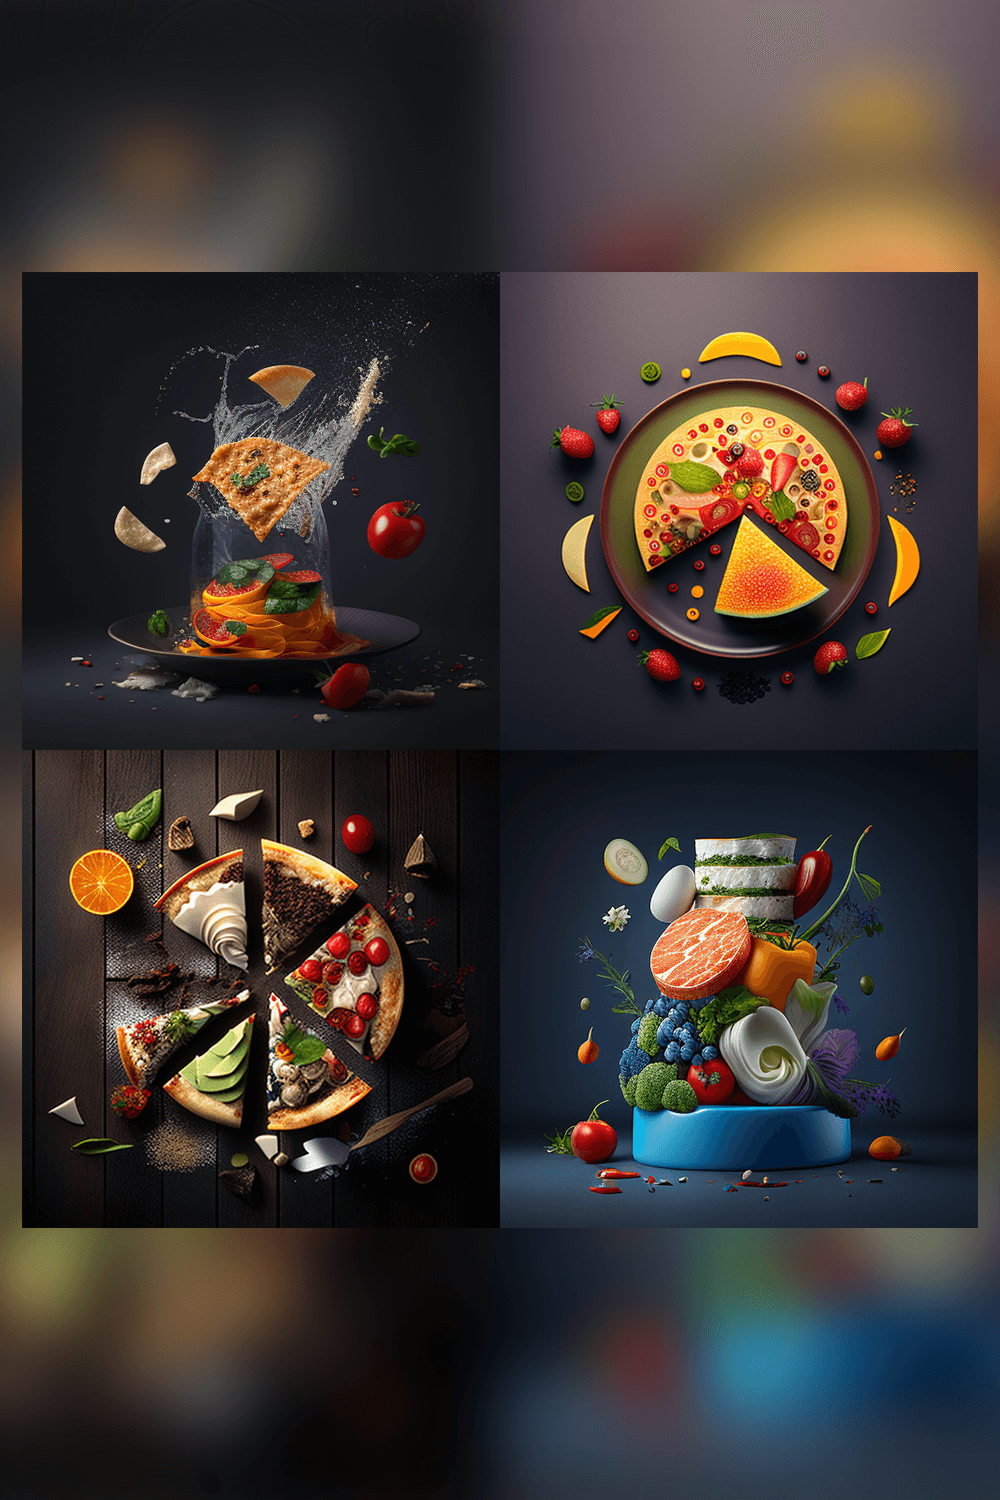 Series of photoshopped images of food.